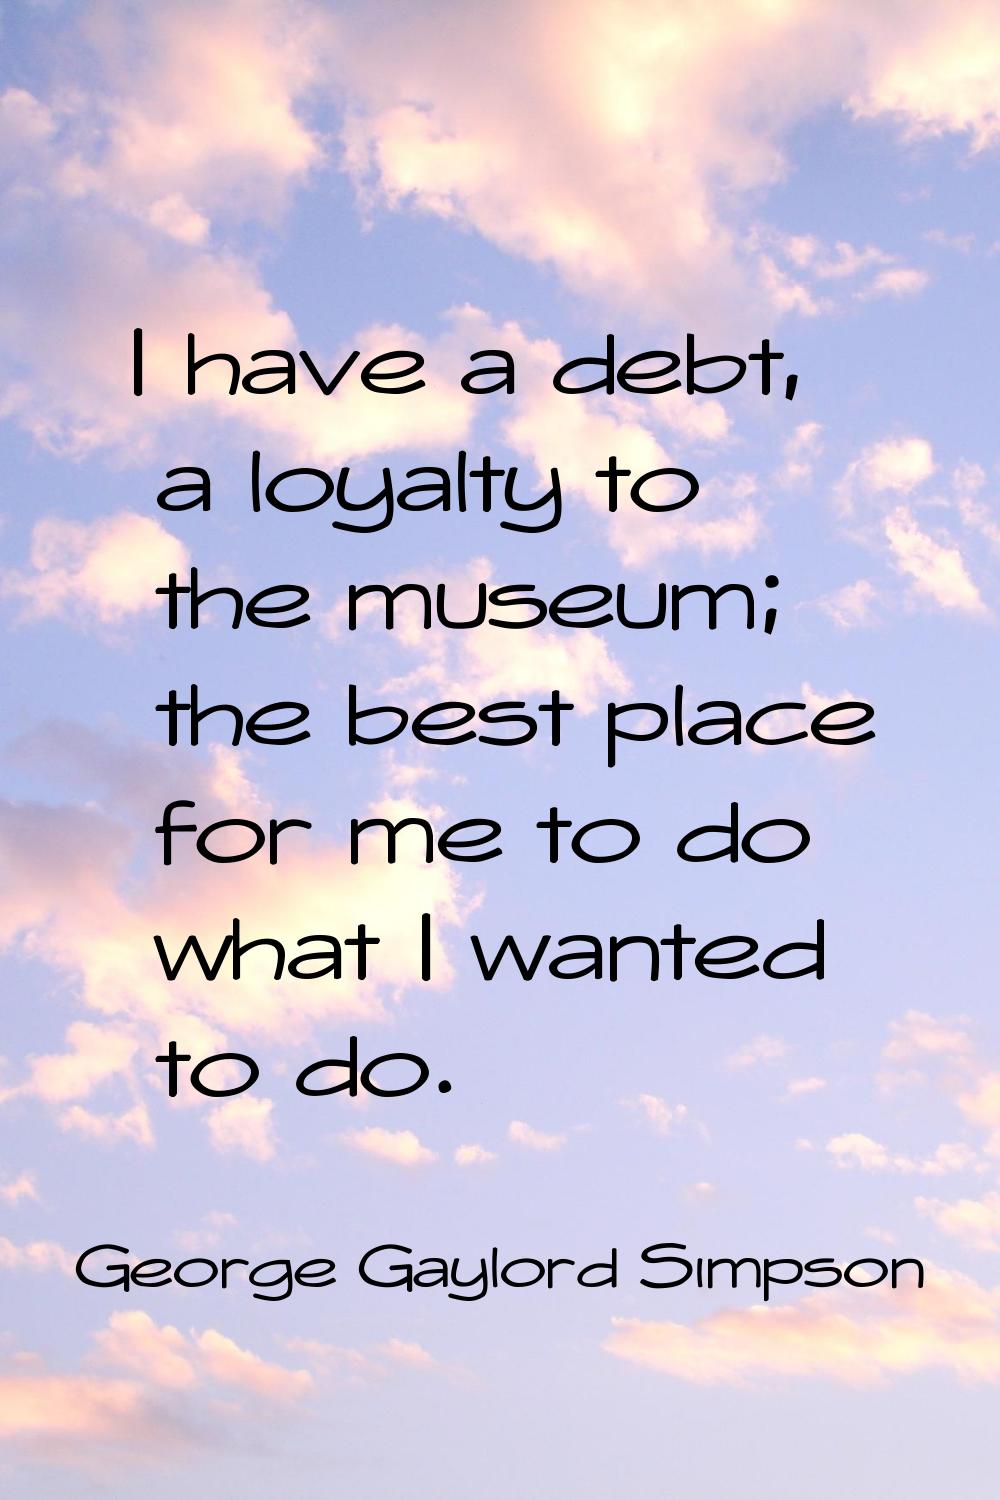 I have a debt, a loyalty to the museum; the best place for me to do what I wanted to do.